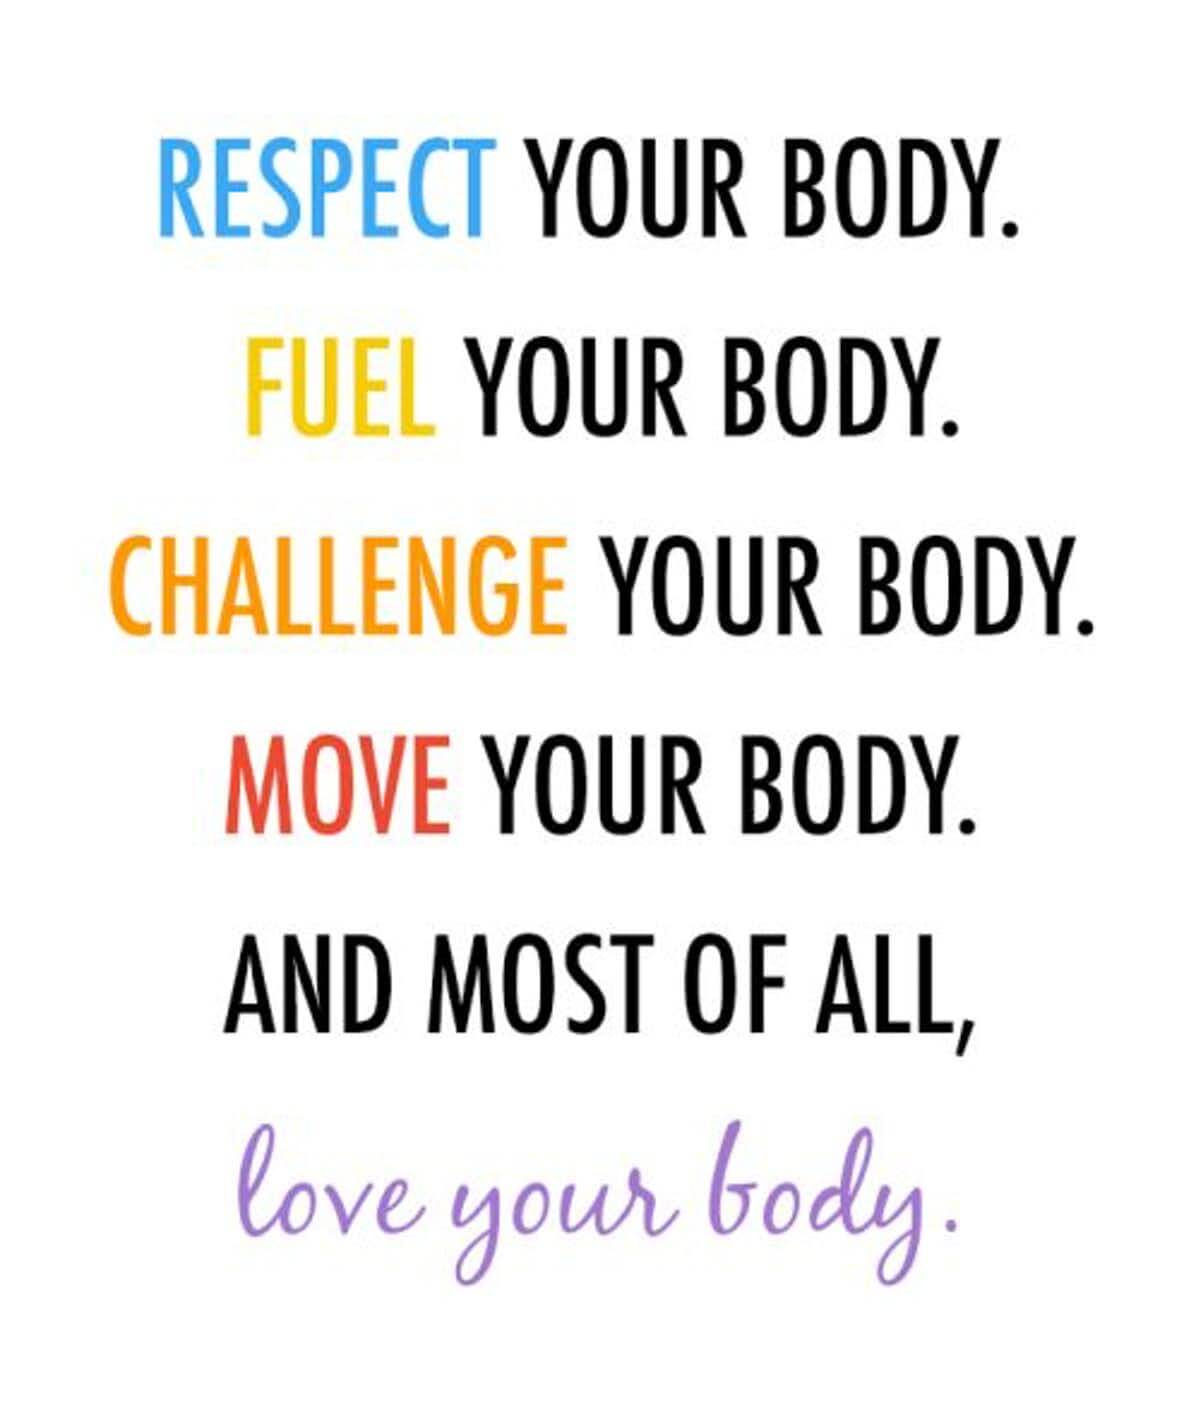 Fitspiration quotes with empowering messages are popular. Pinterest